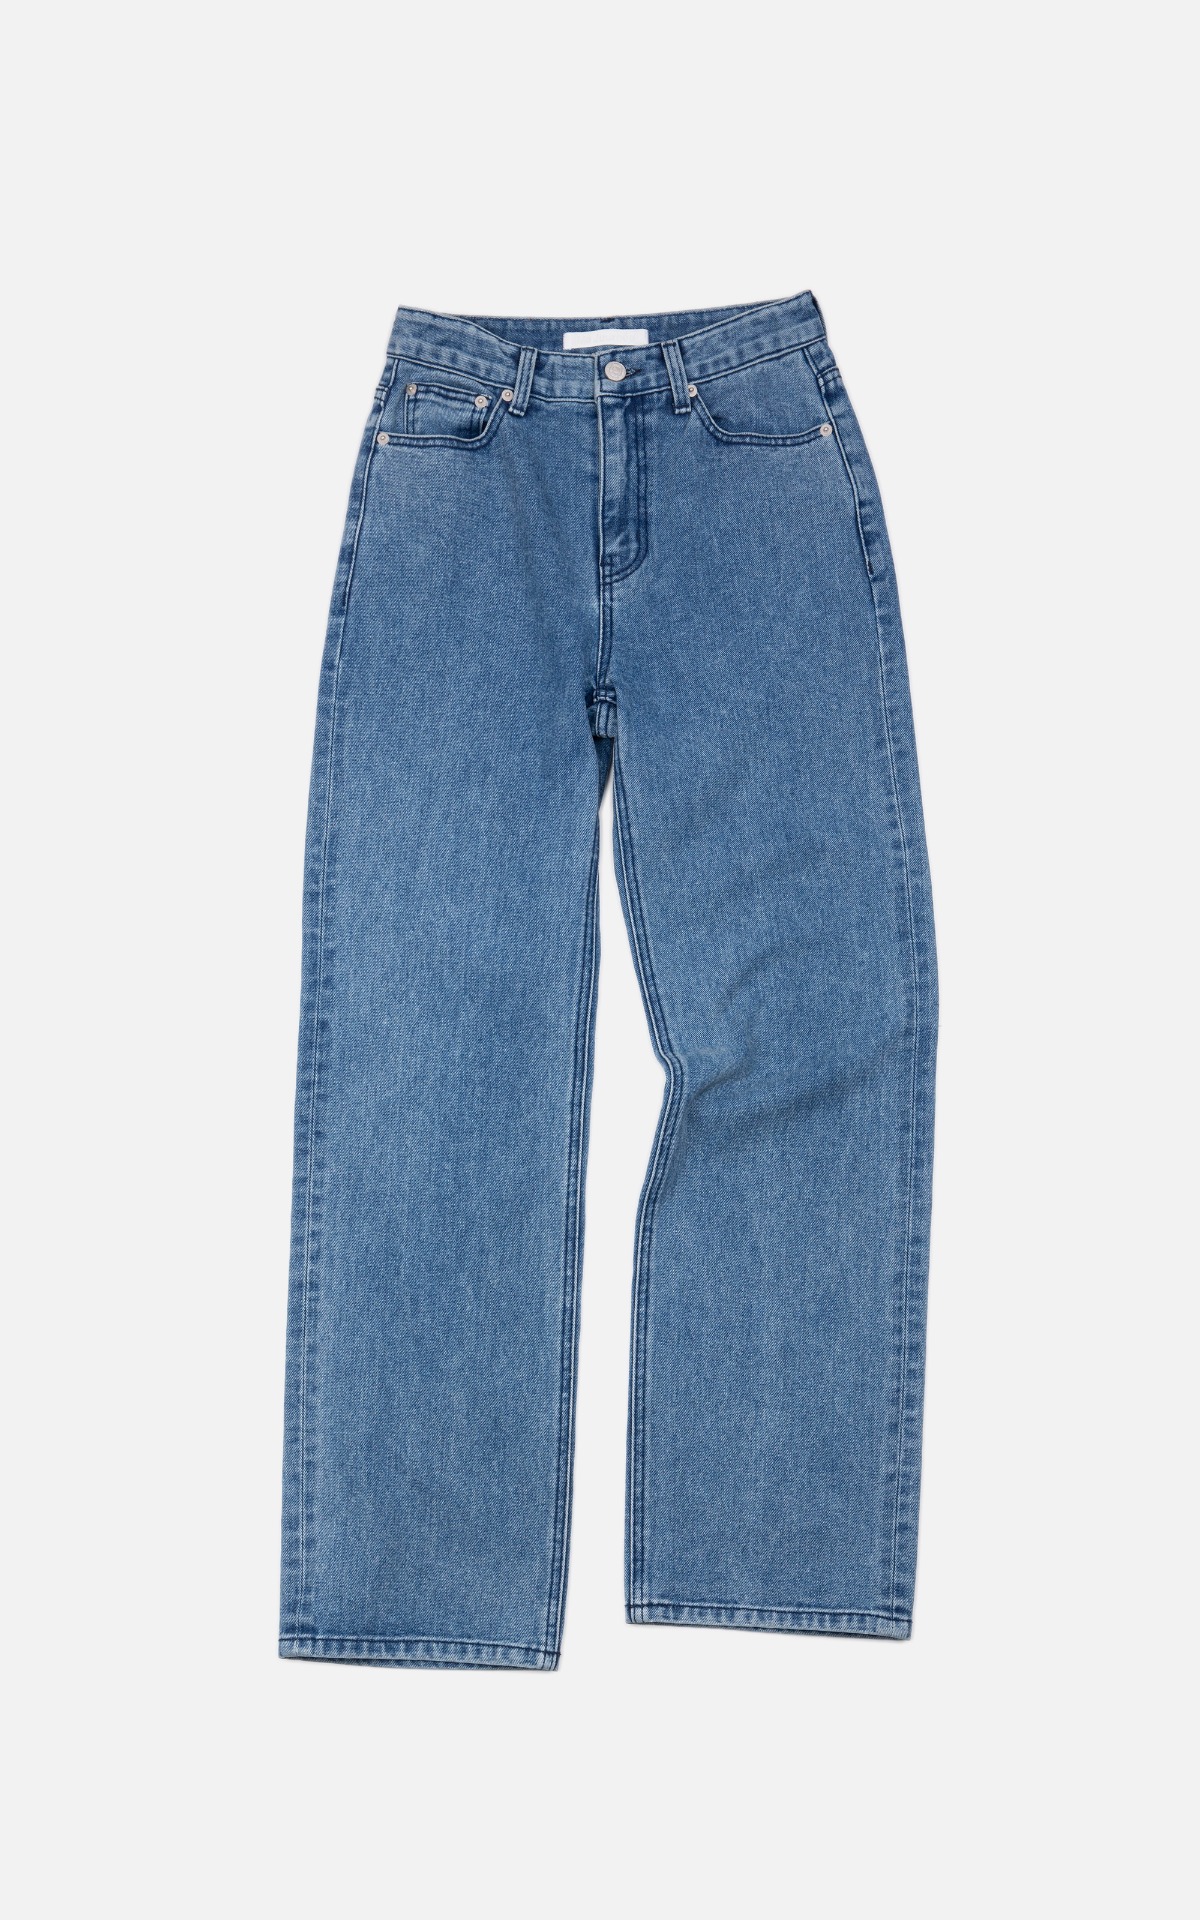 ESSENTIAL STRAIGHT JEANS_BLUE JEAN